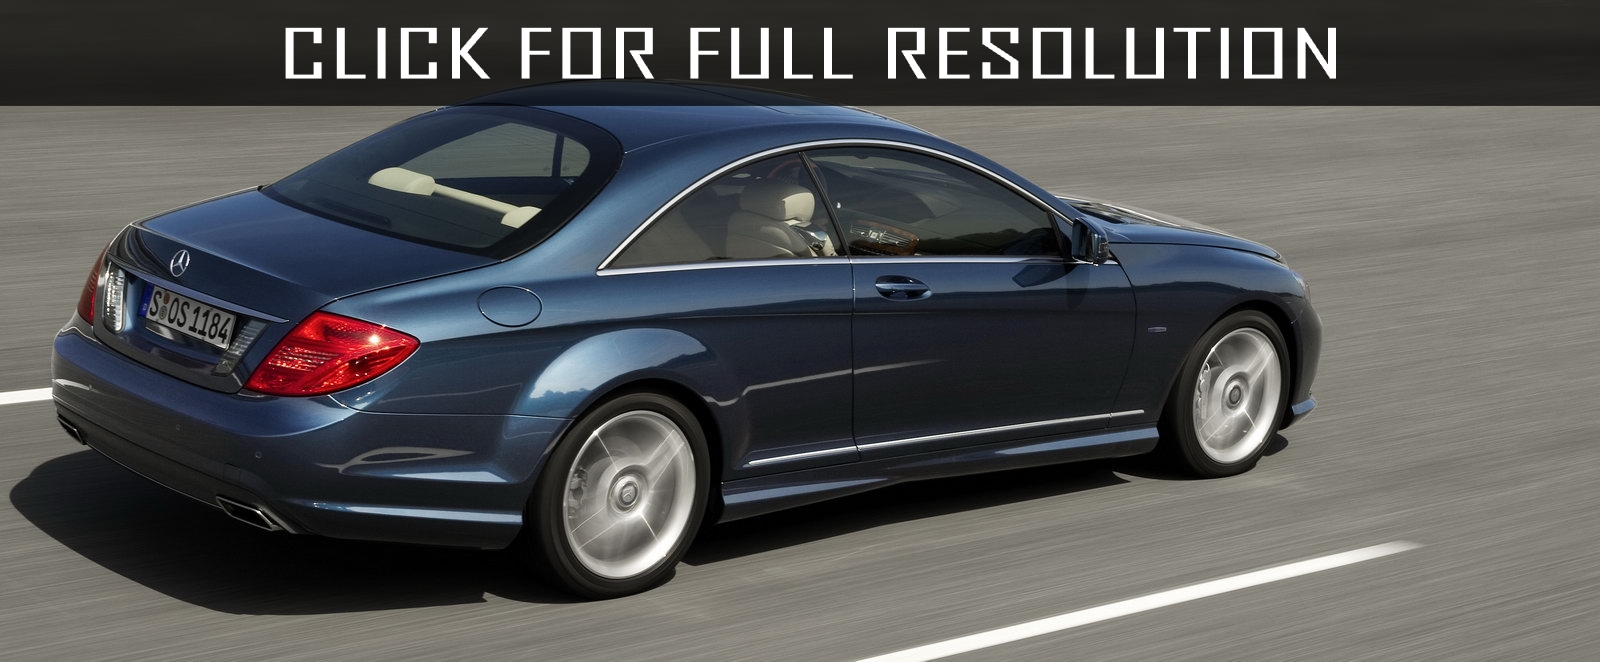 2011 Mercedes Benz S Class Coupe